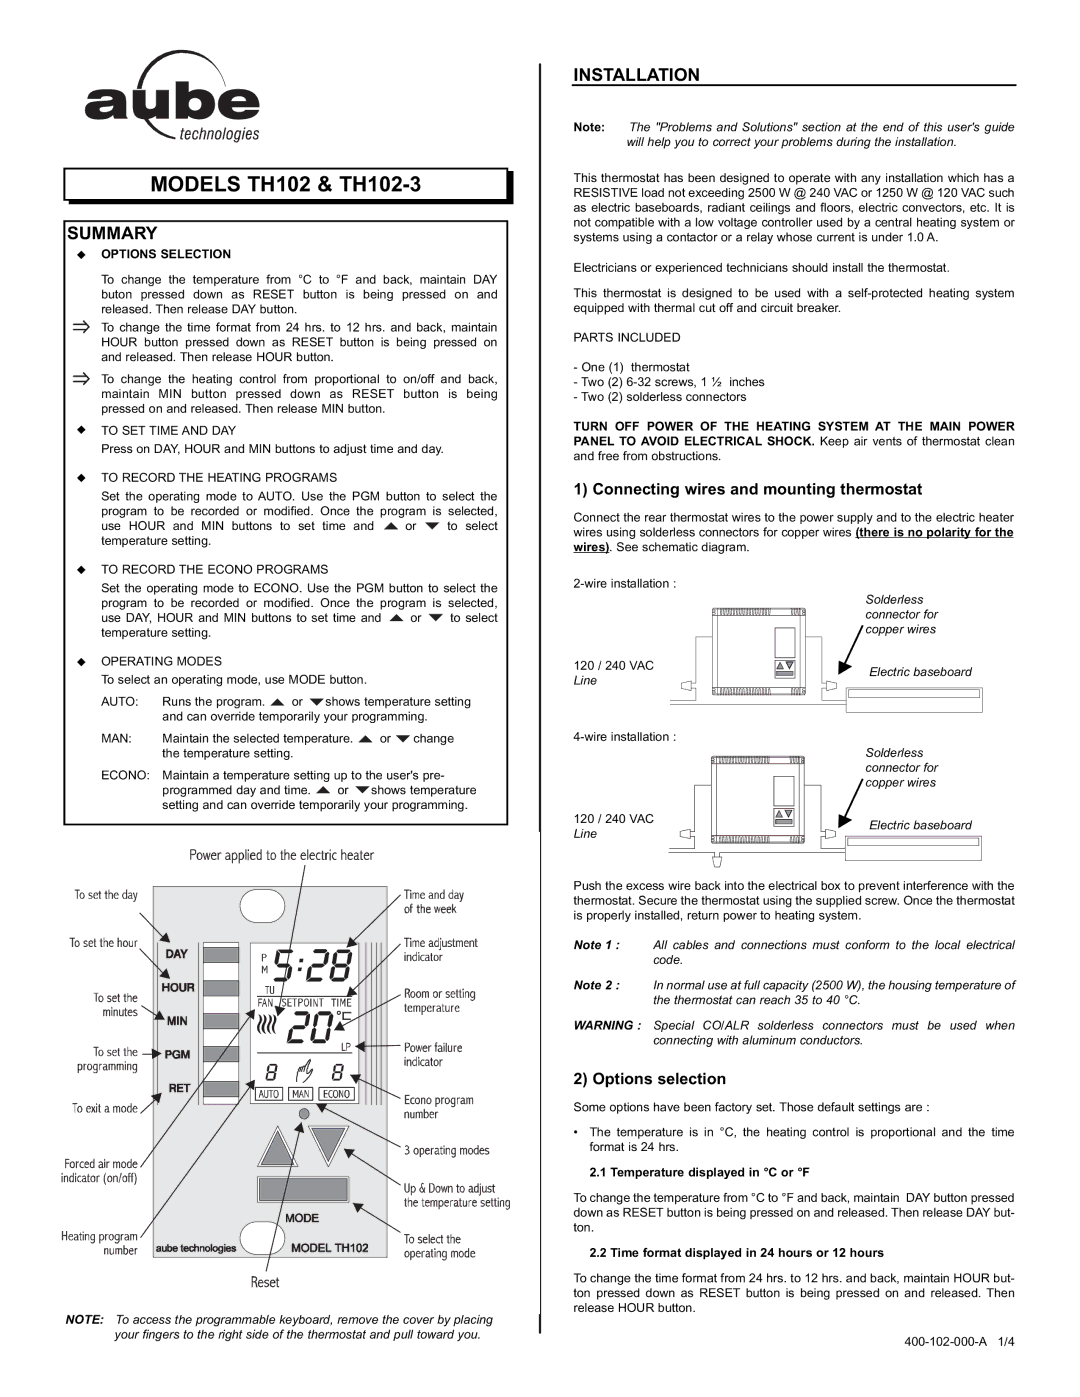 Aube Technologies TH102-3 manual Summary, Installation, Connecting wires and mounting thermostat, Options selection 